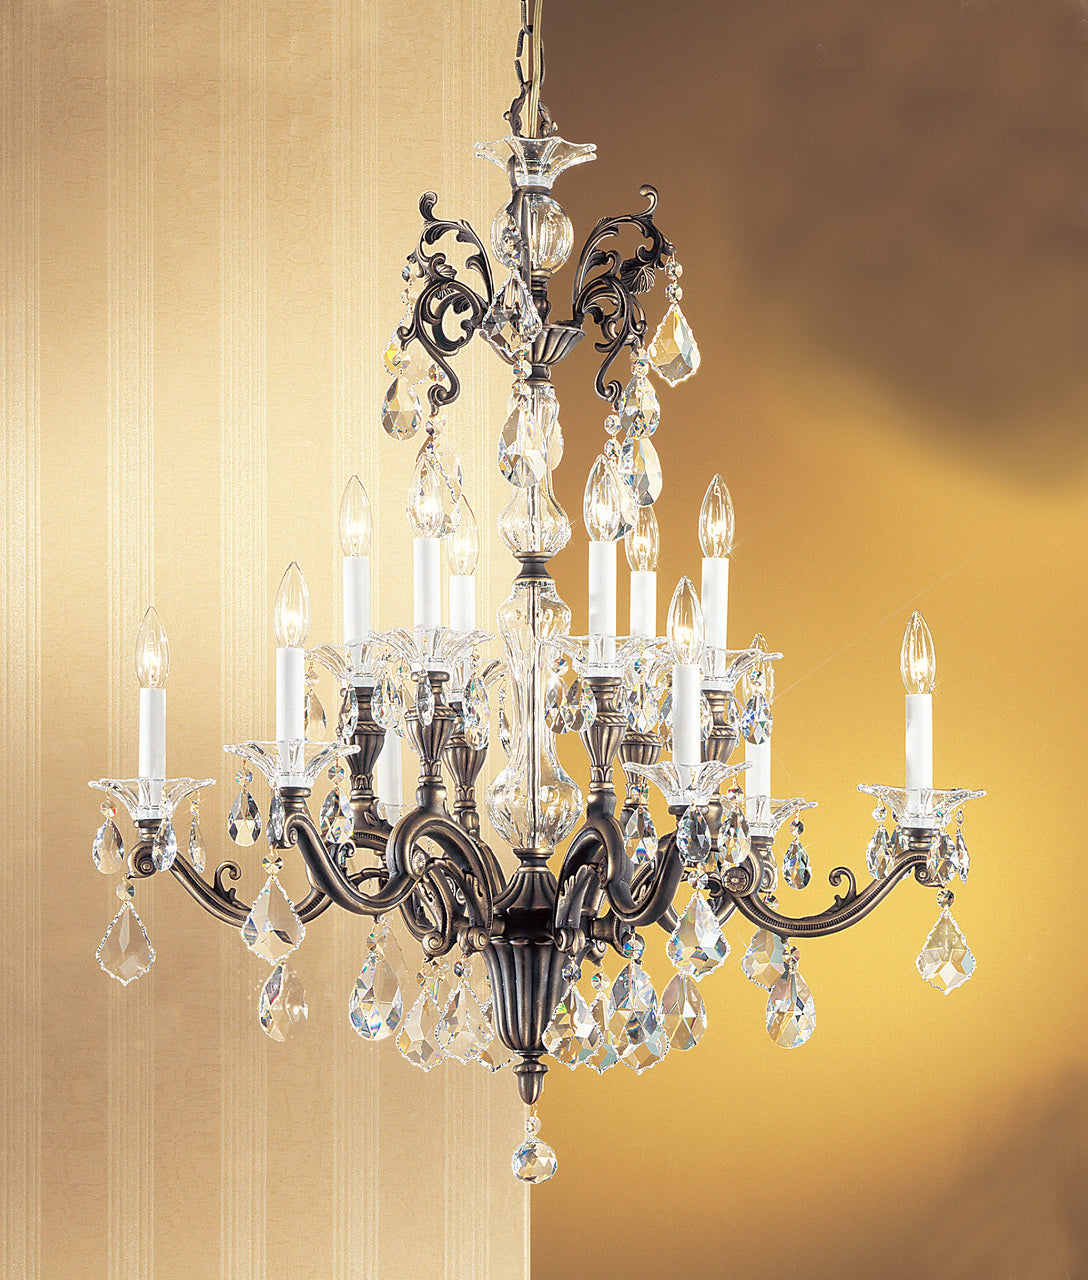 Classic Lighting 57112 RB CGT Via Firenze Crystal Chandelier in Roman Bronze (Imported from Spain)